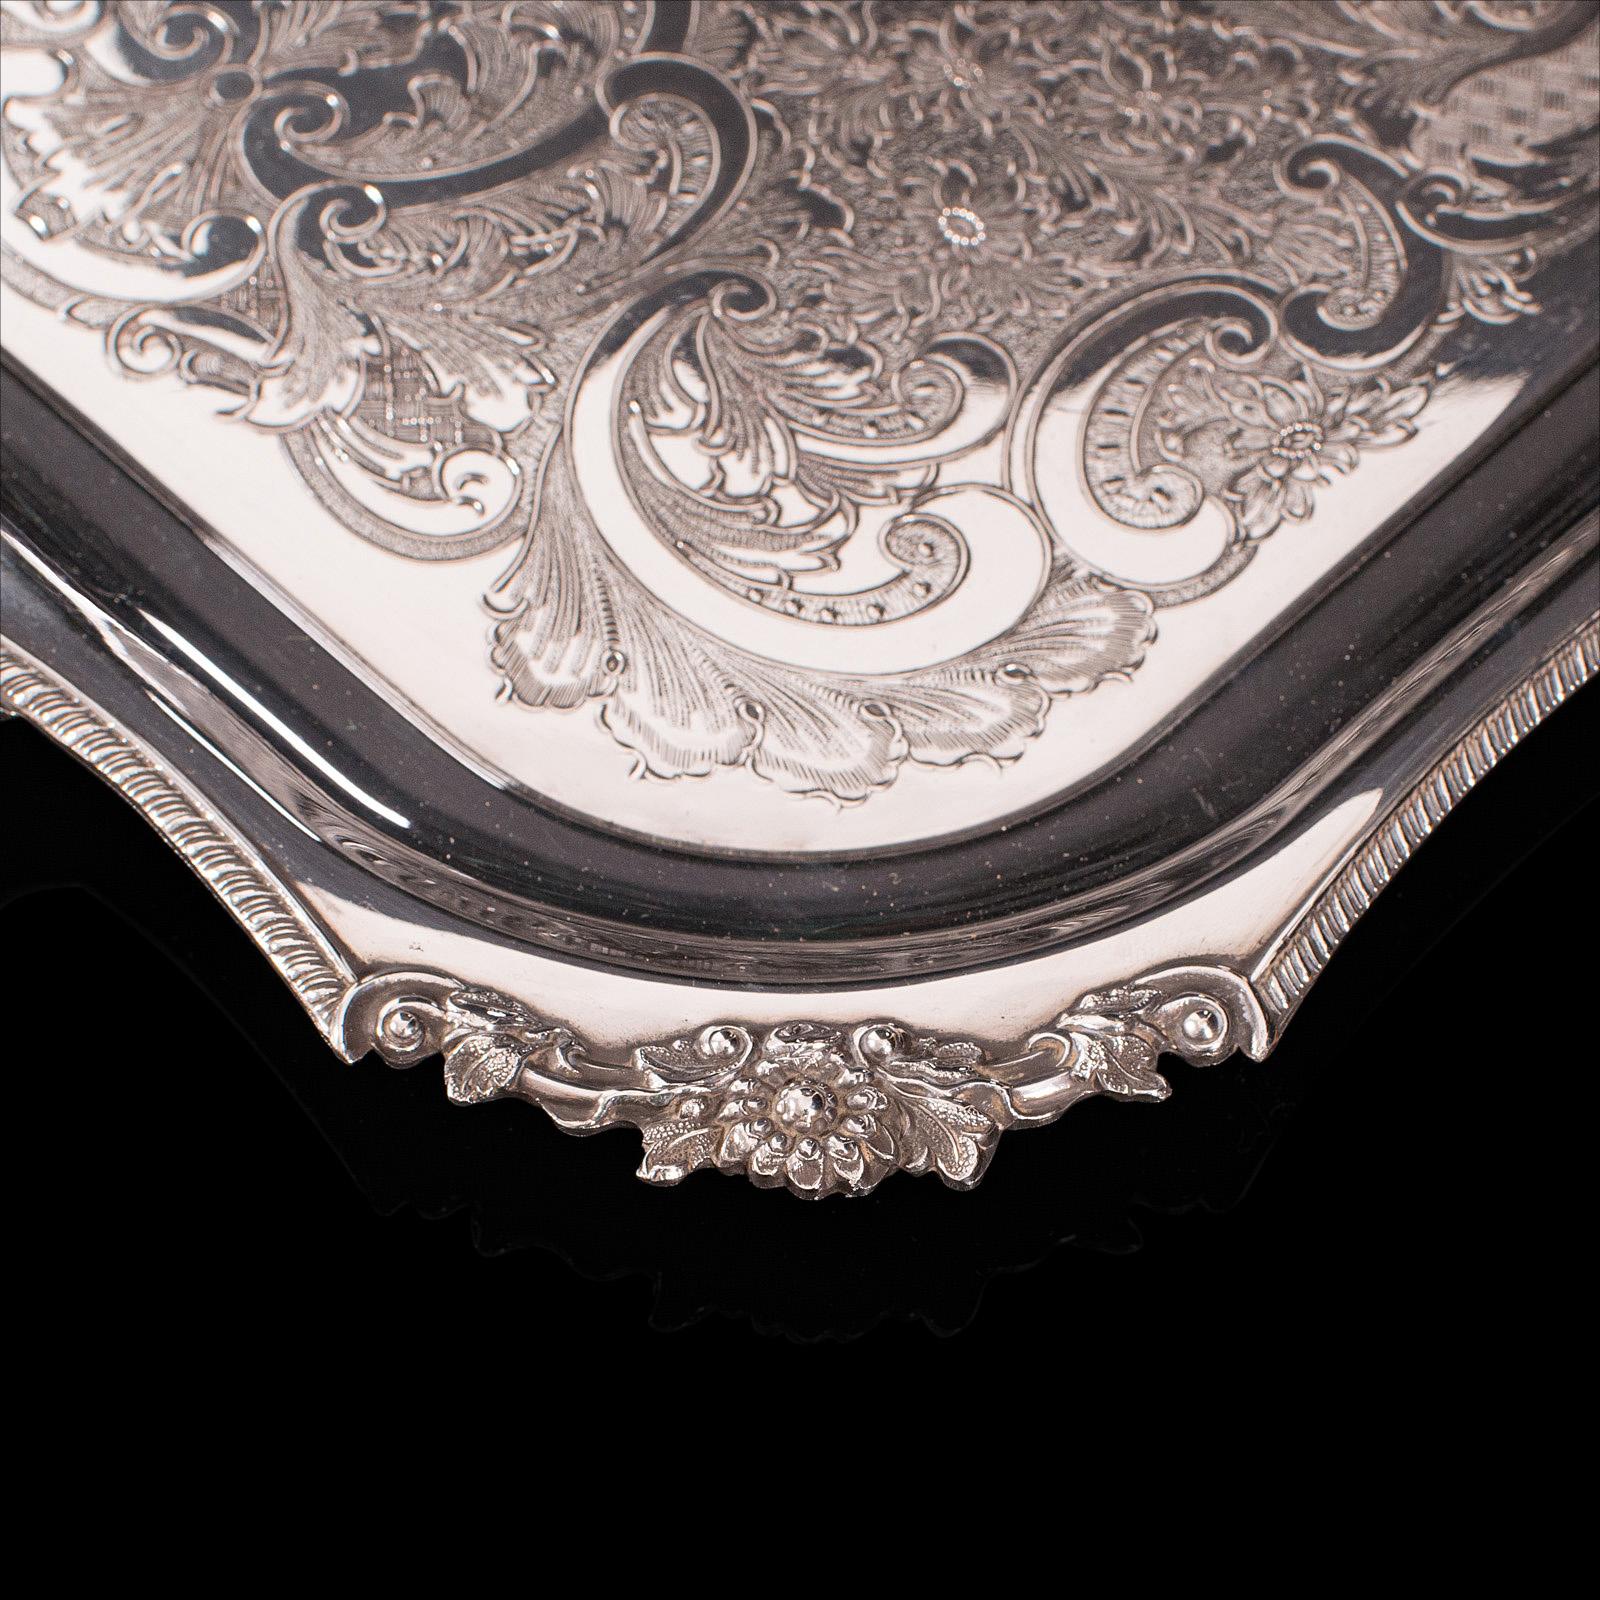 Vintage Serving Tray, English, Silver Plated Afternoon Tea Platter, Viners, 1940 1